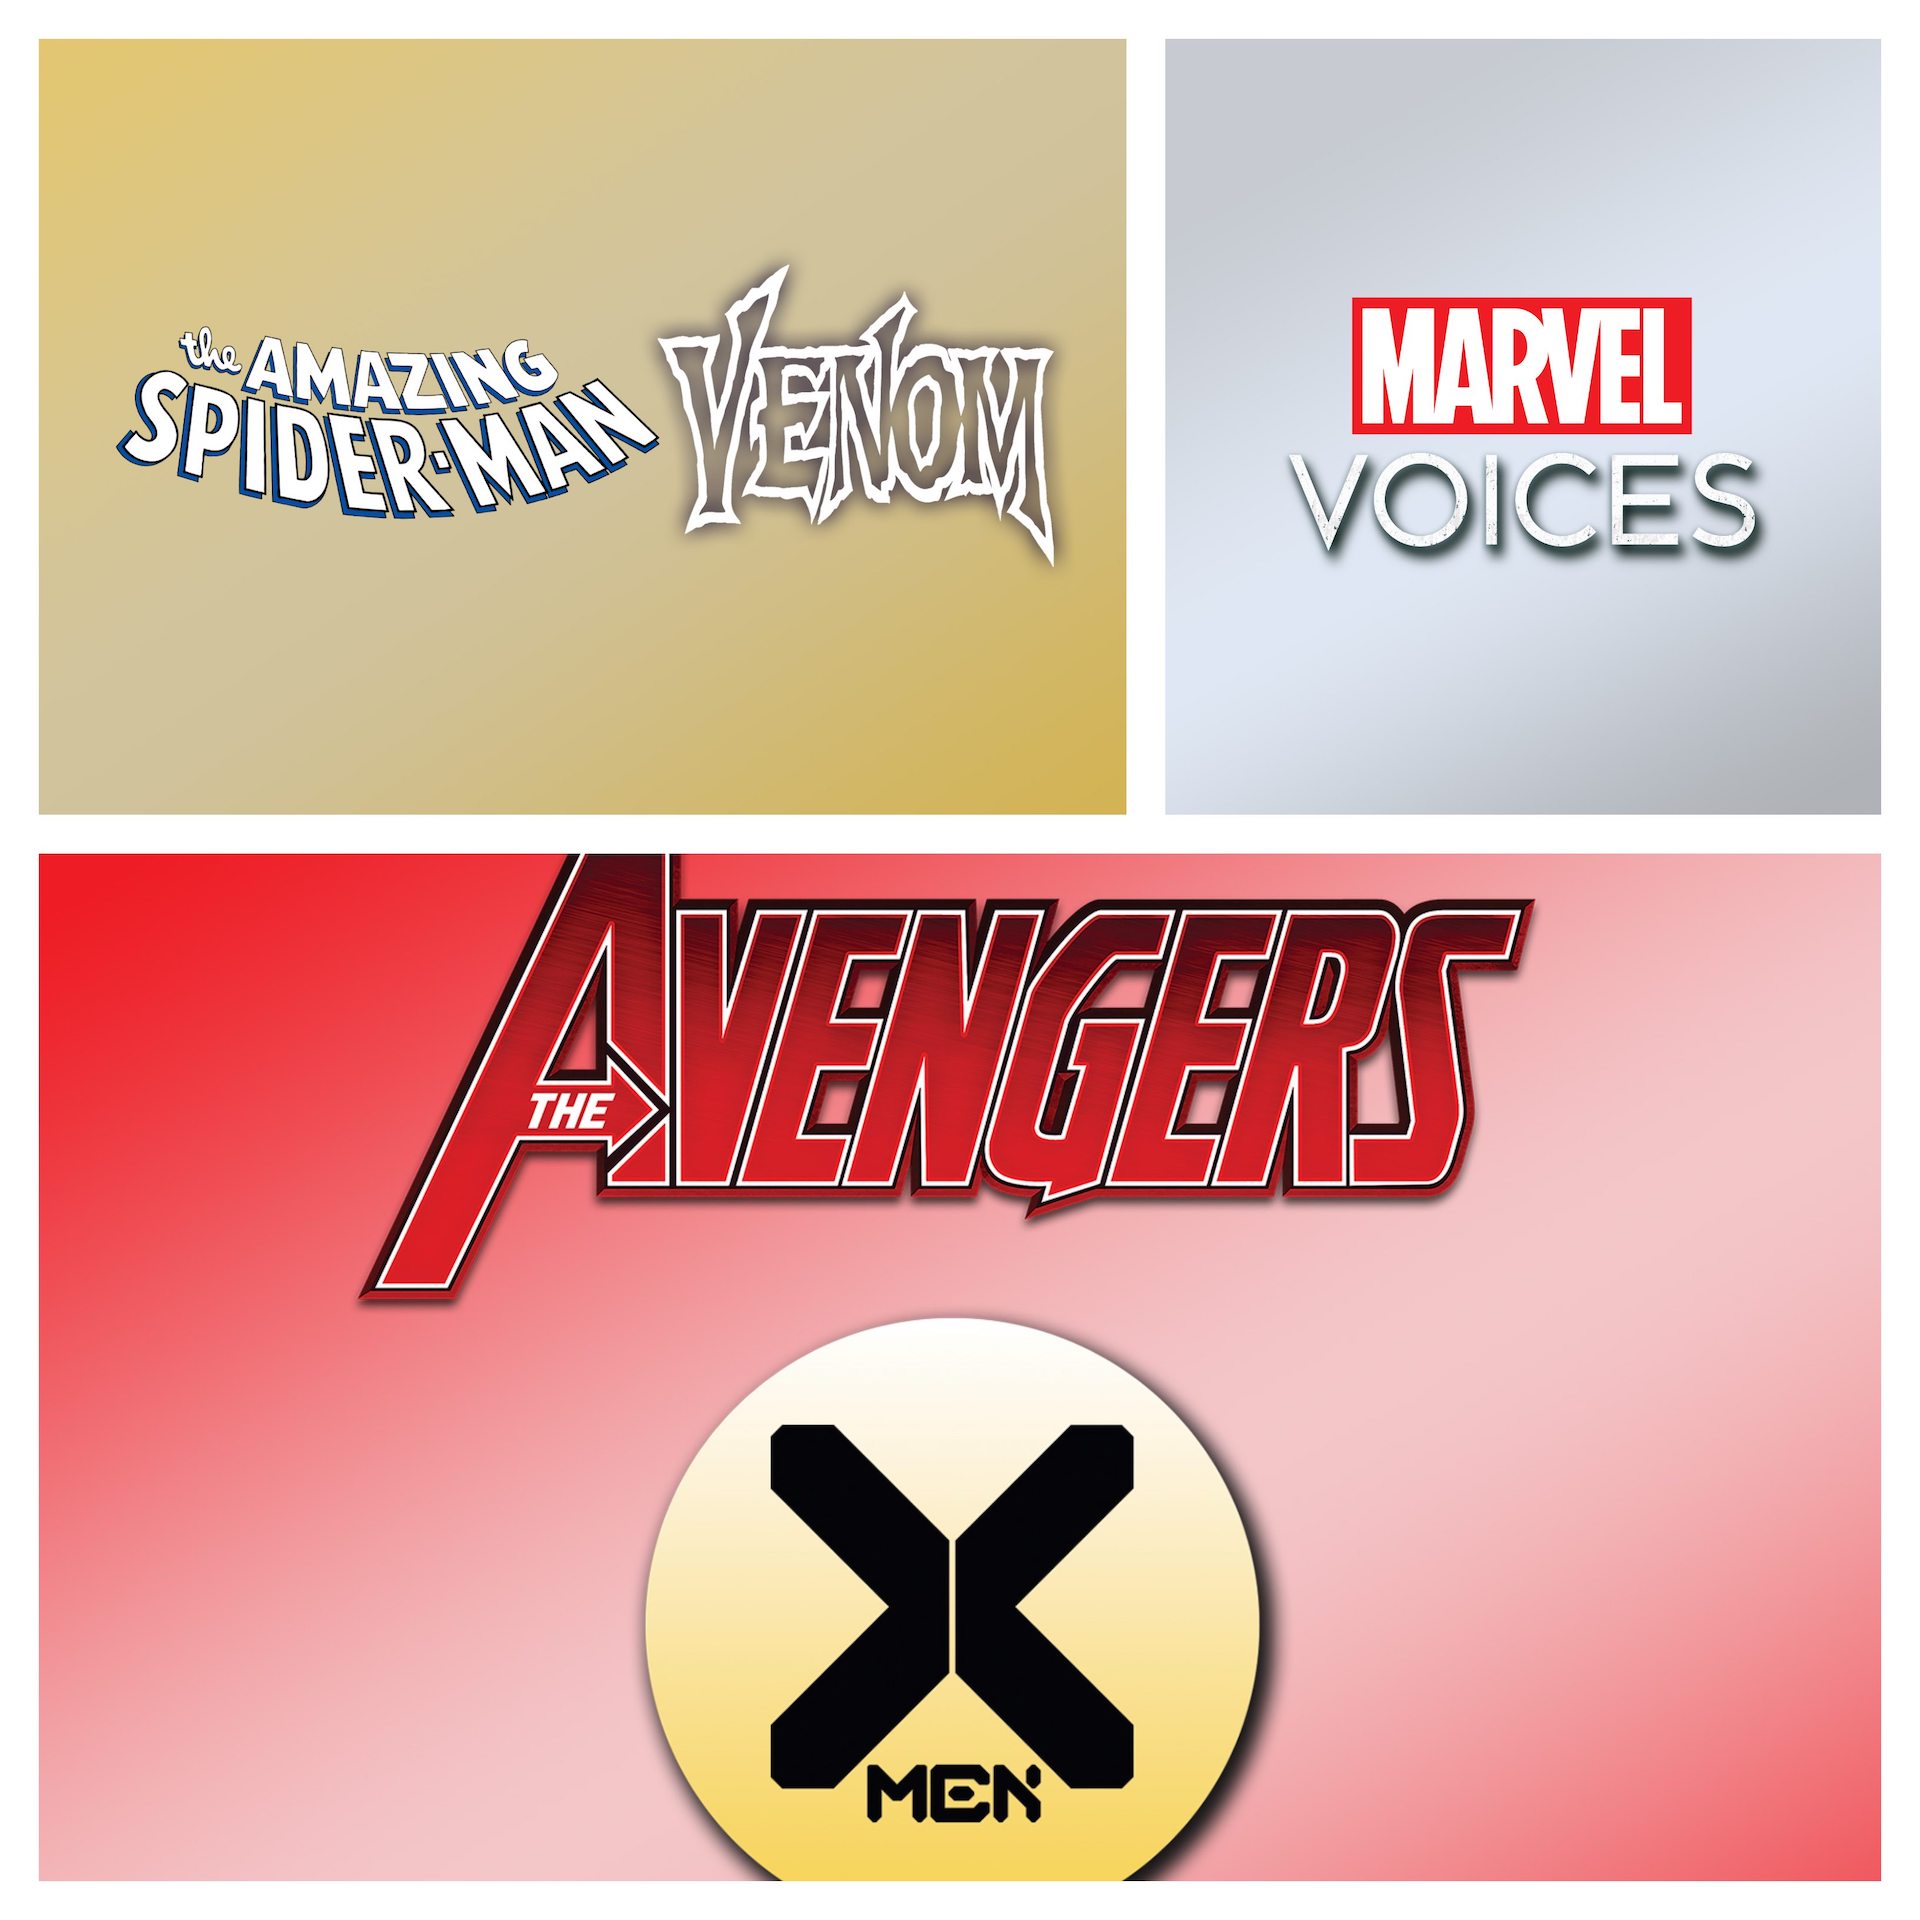 Marvel reveals 2022 Free Comic Book Day titles including Avengers, X-Men, and more